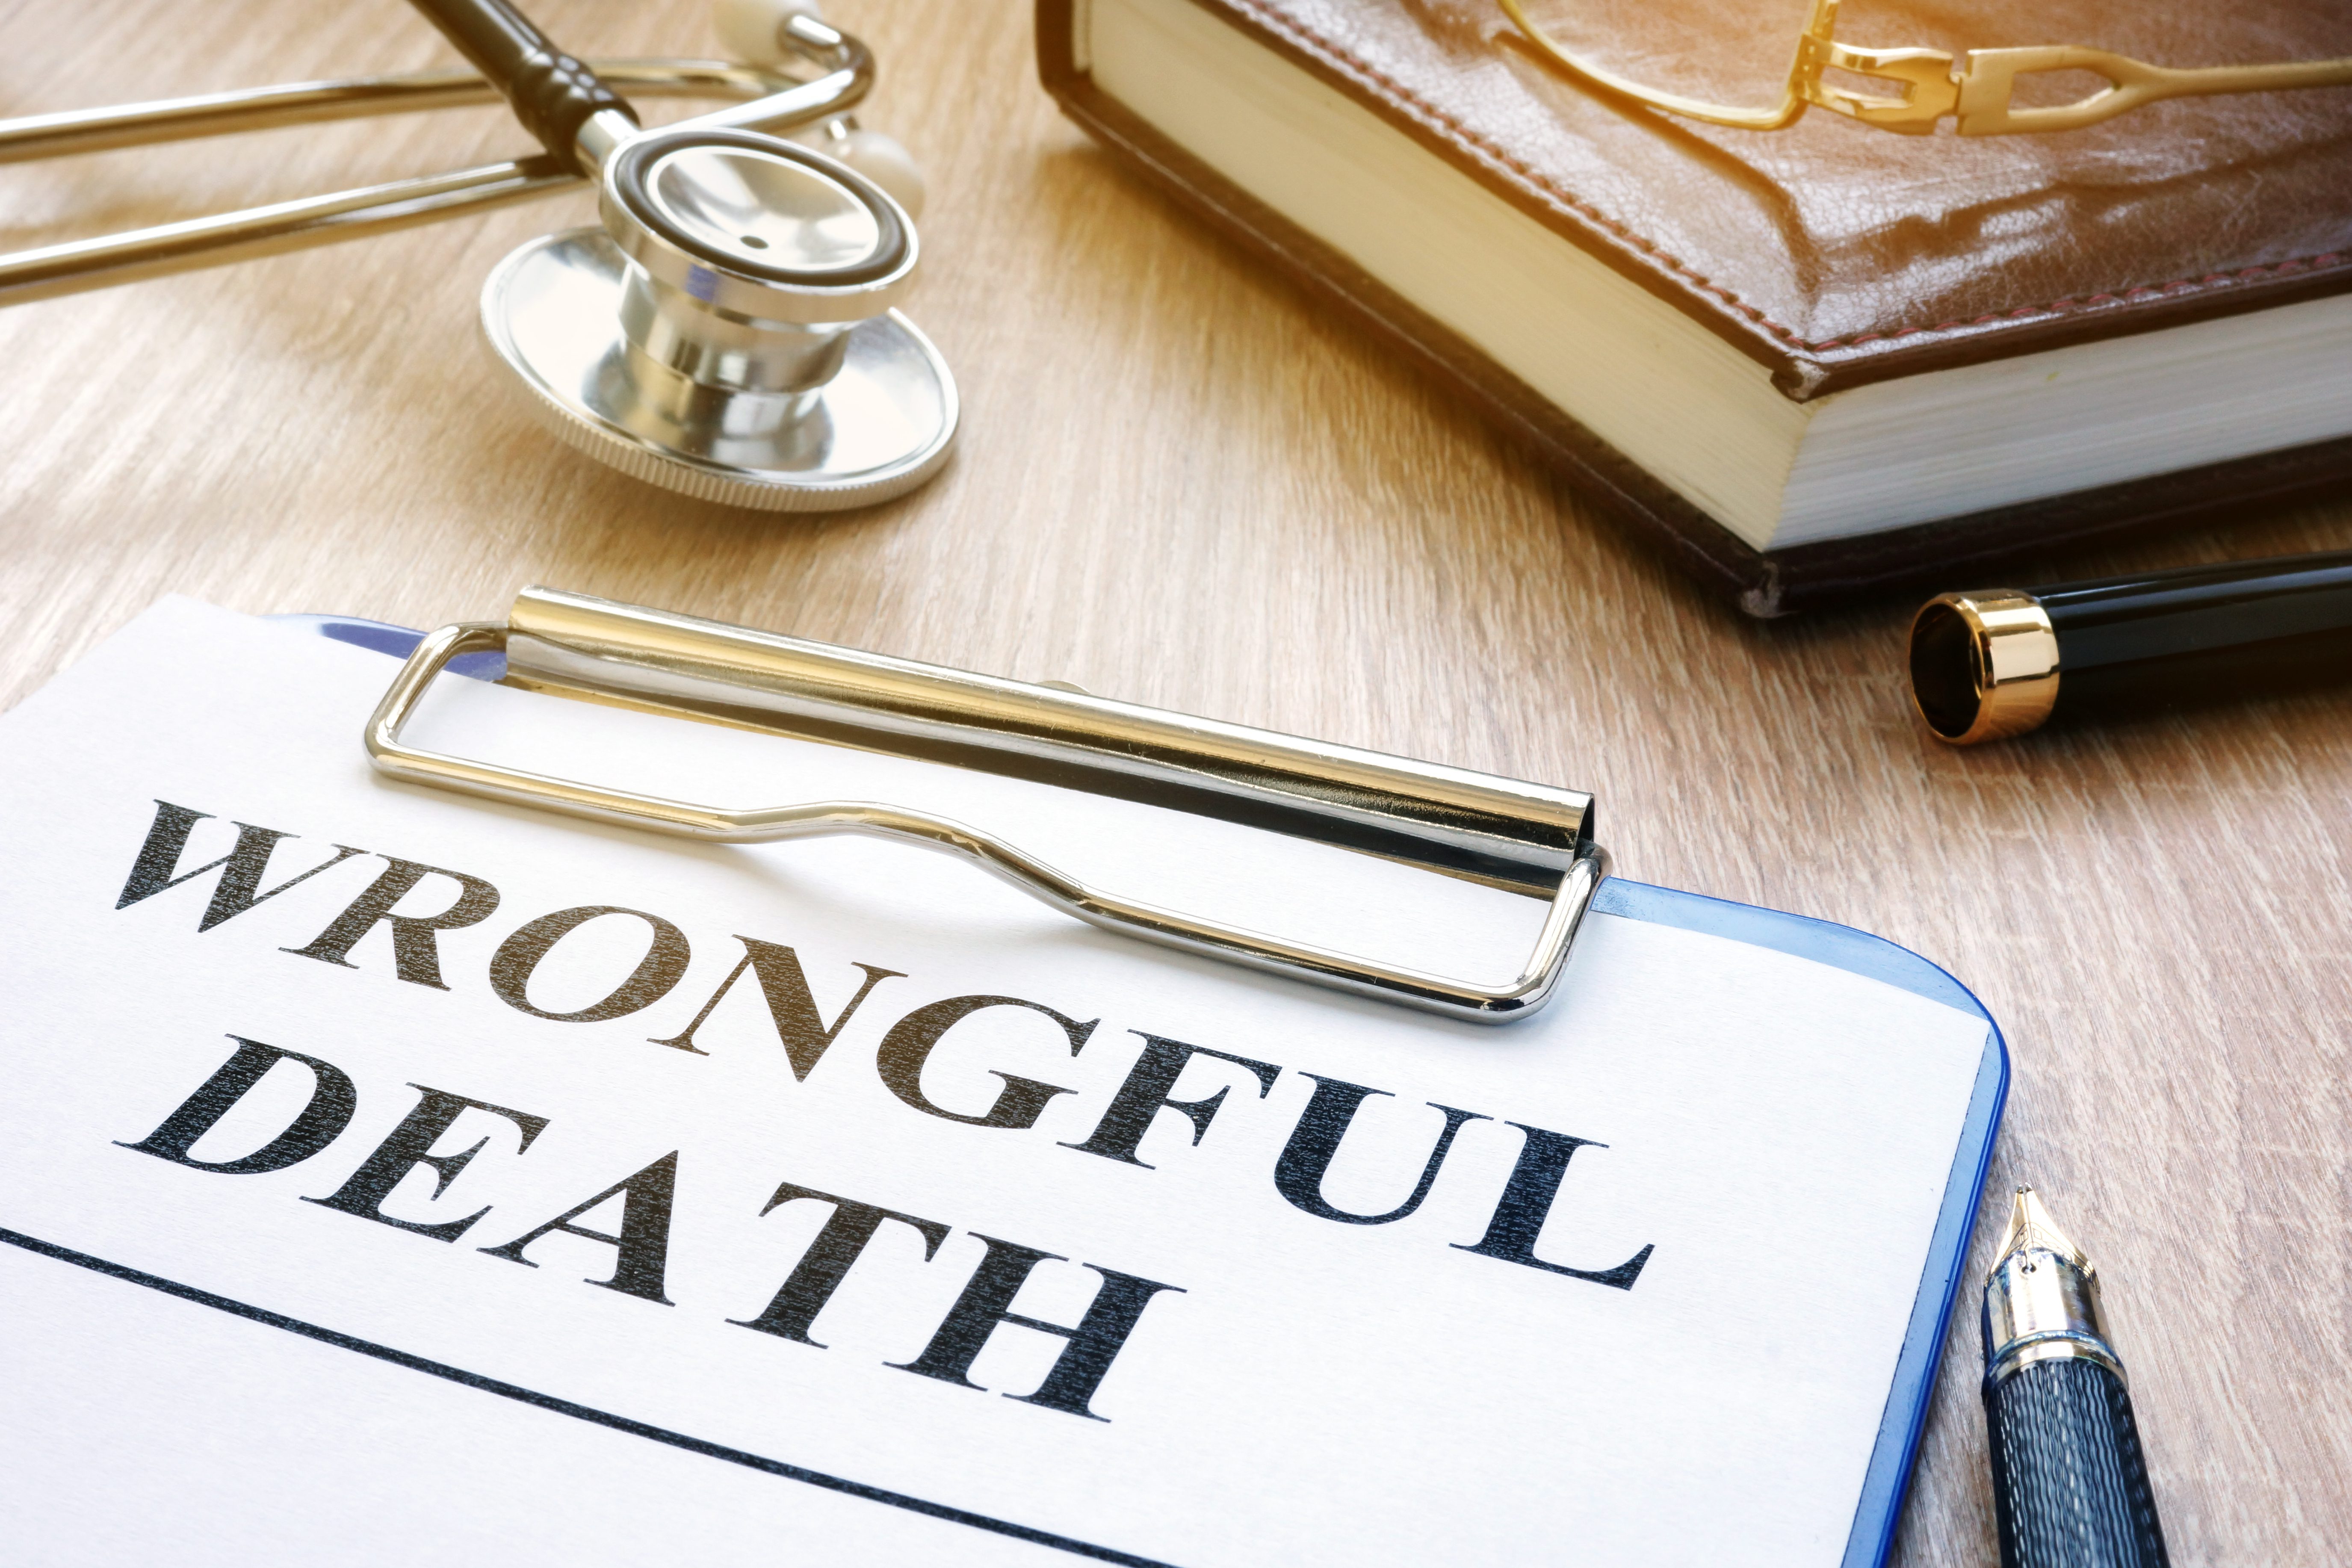 What Is The Difference Between A Wrongful Death Lawsuit And A Personal Injury Claim?